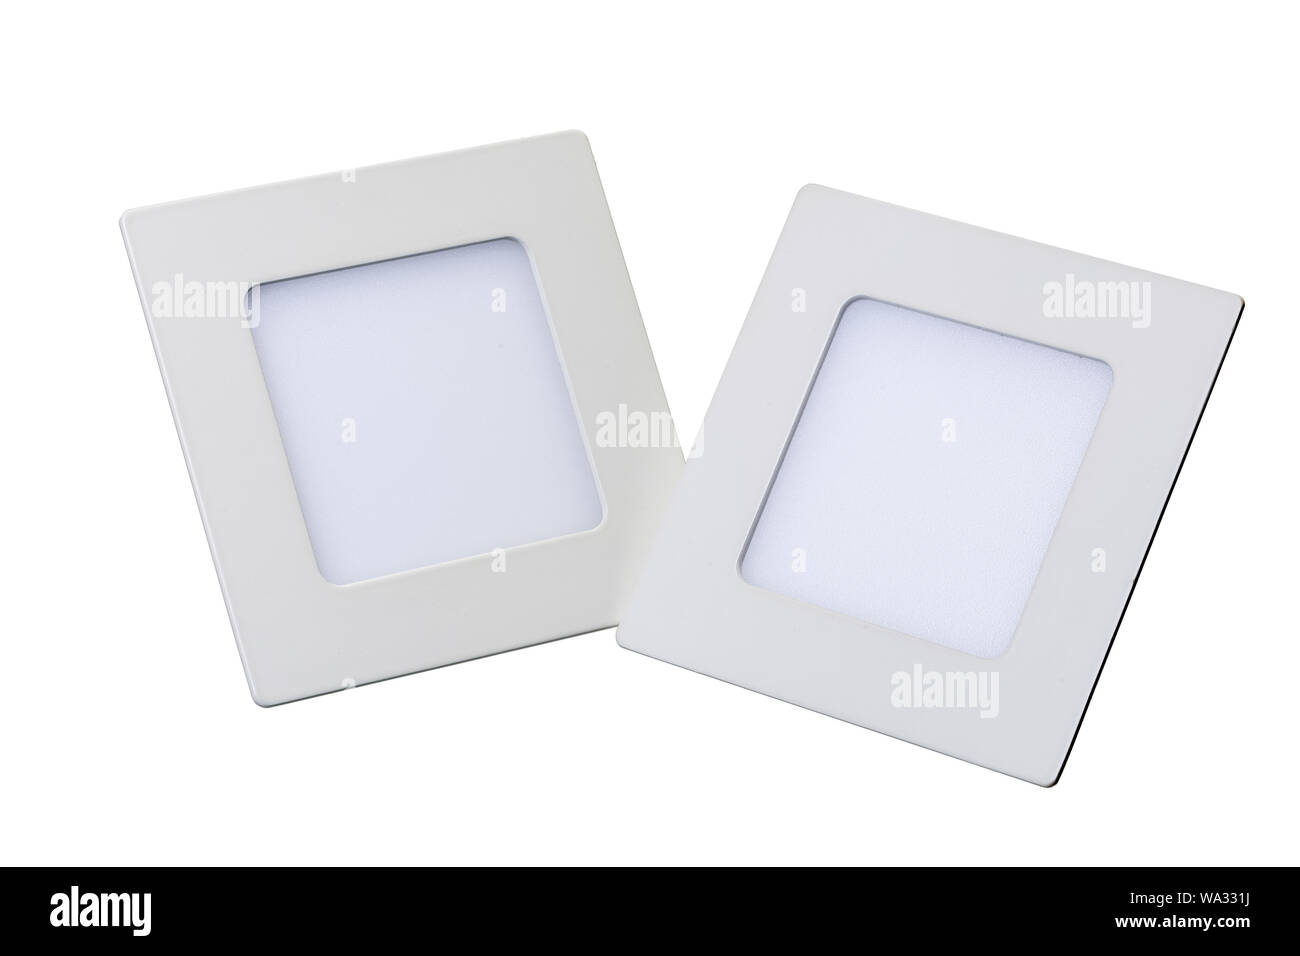 Two non-standard square LED lamps isolated. Stock Photo